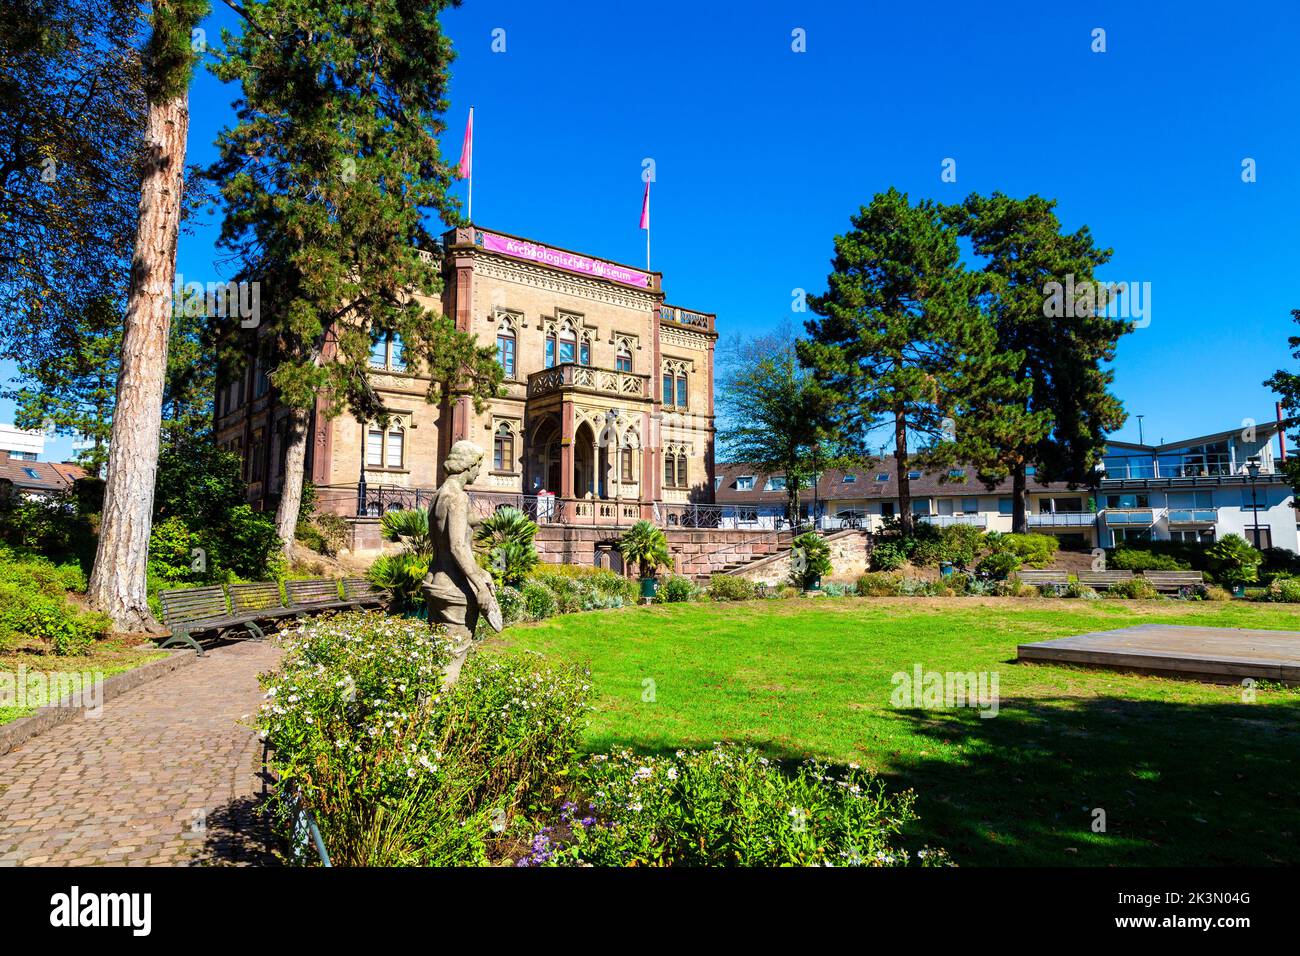 Exterior of Colombischlössle Archeological Museum housed in the mid 19th century Gothic Tudor style Colombi castle manor, Freiburg im Breisgau, German Stock Photo